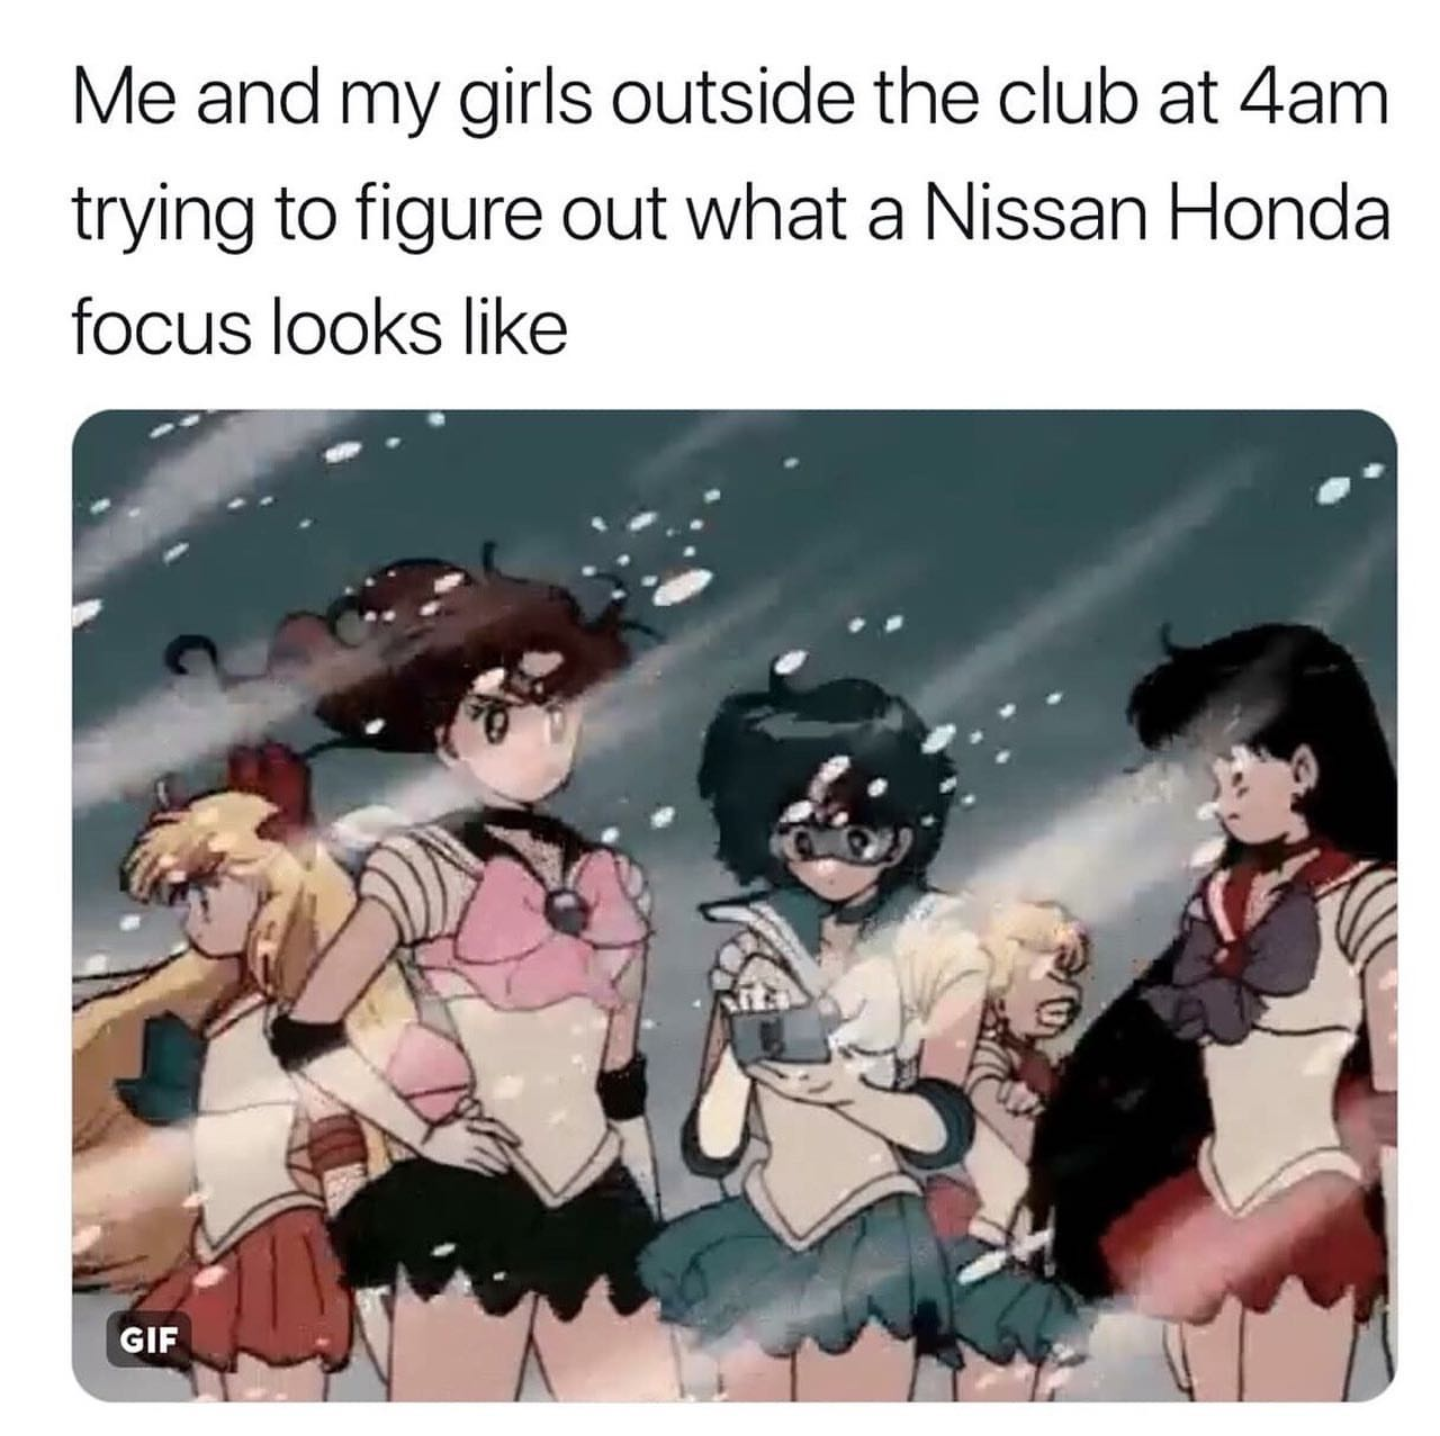 sailor moon meme - Me and my girls outside the club at 4am trying to figure out what a Nissan Honda focus looks Gif